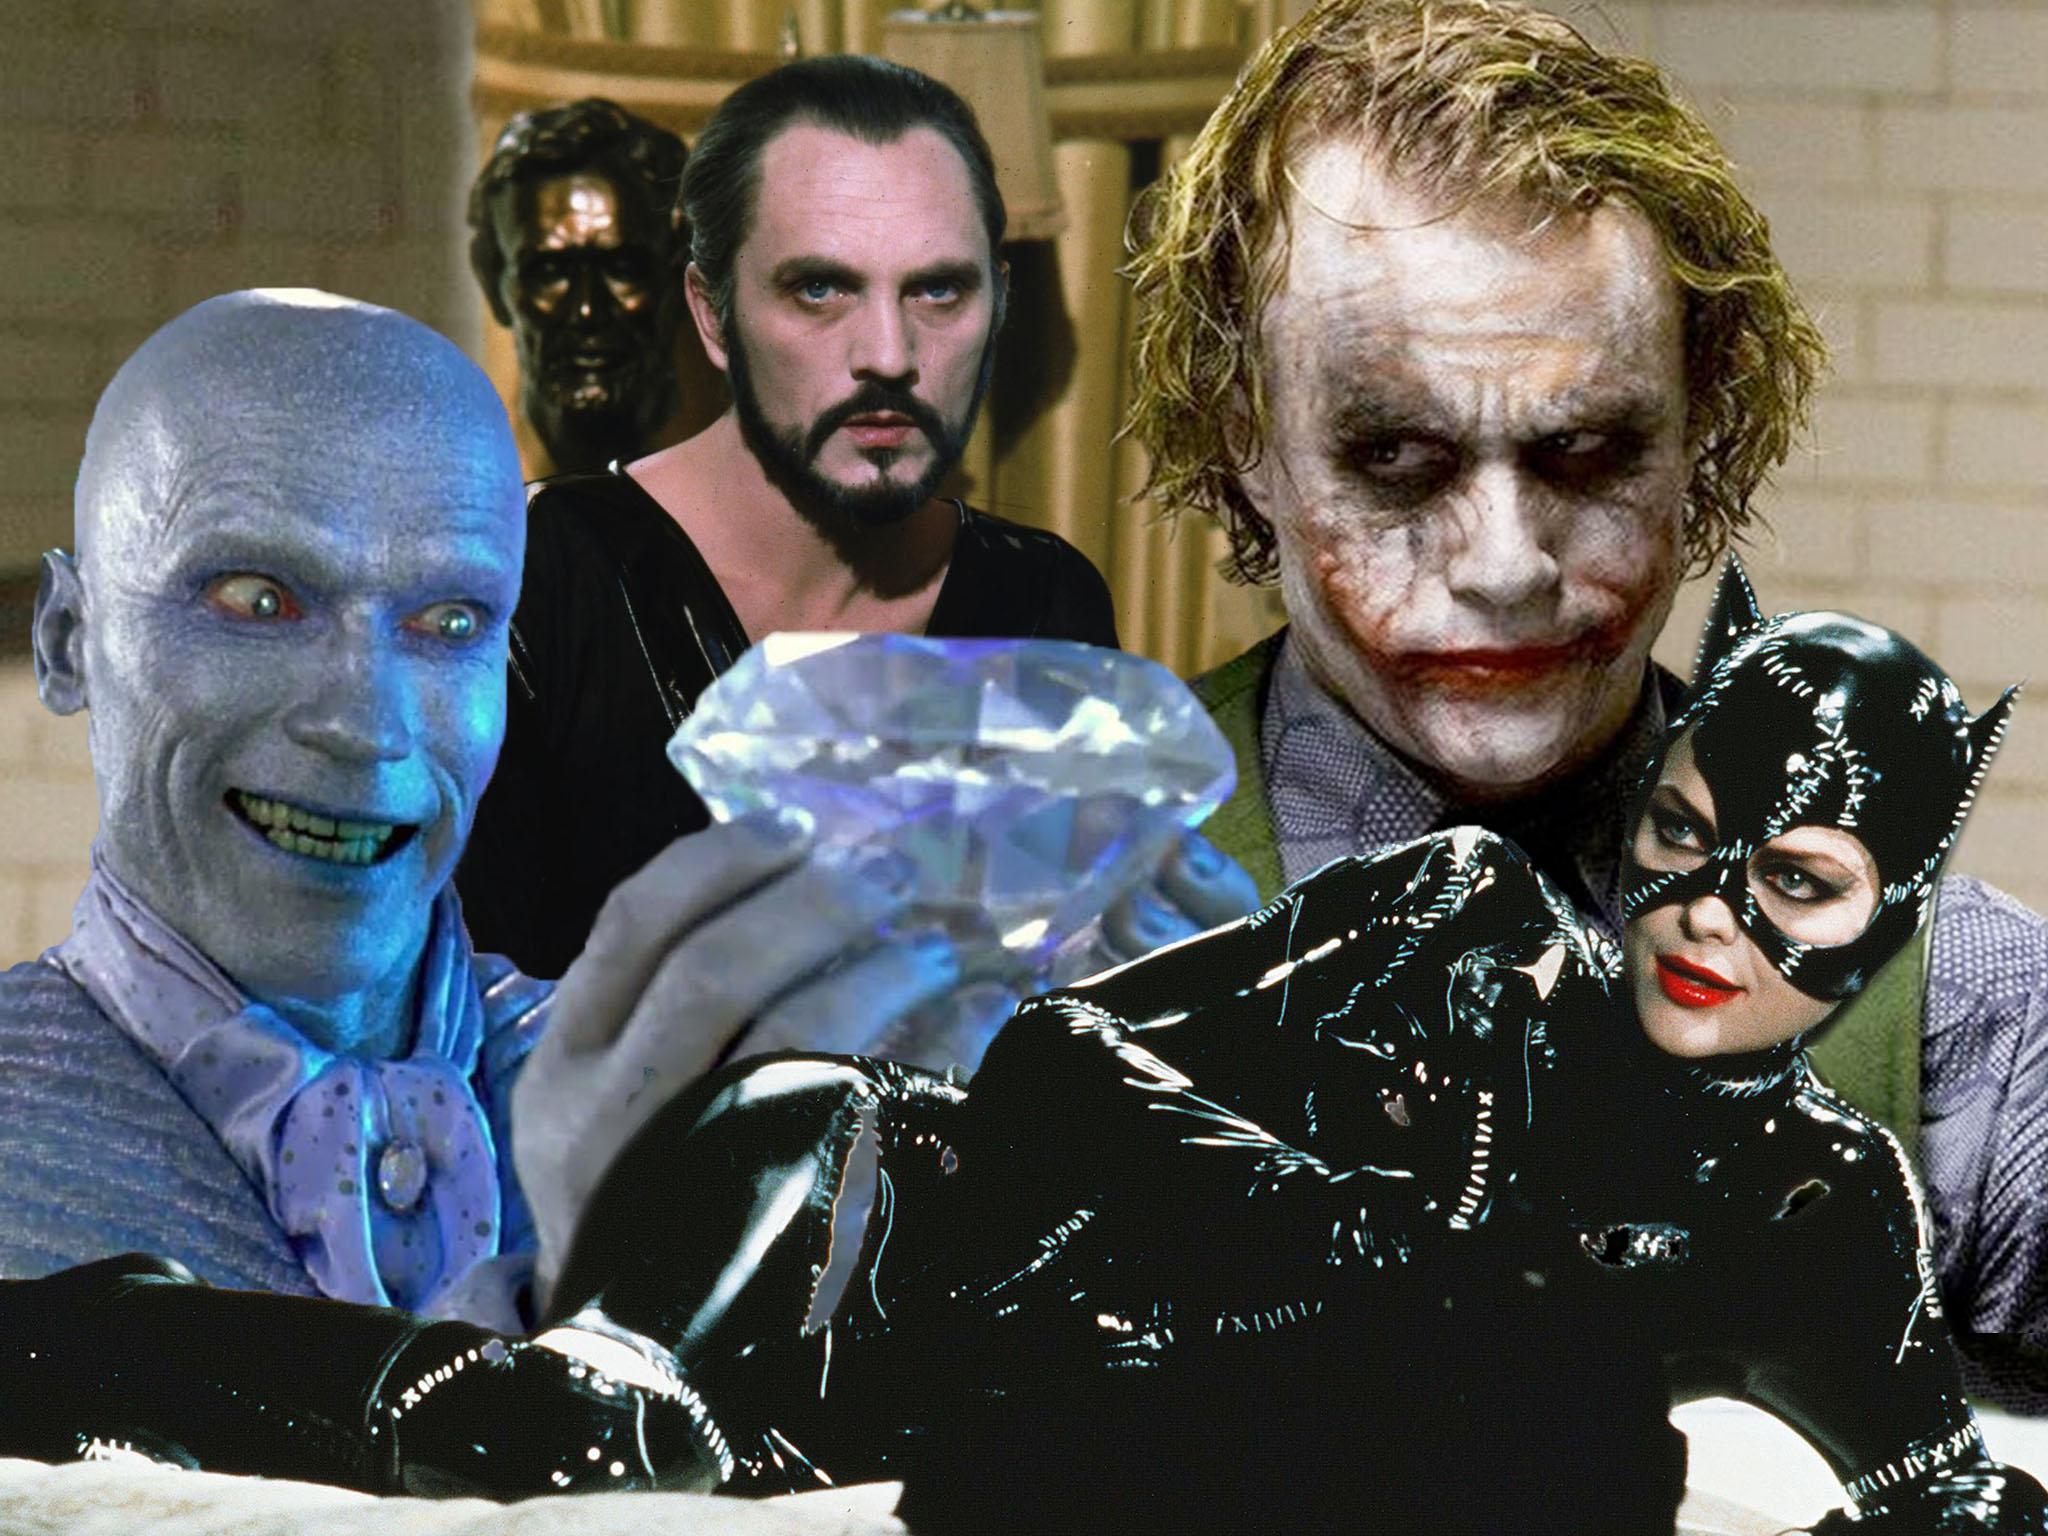 34 Dc Comics Movie Villains Ranked From The Joker To Mr Freeze